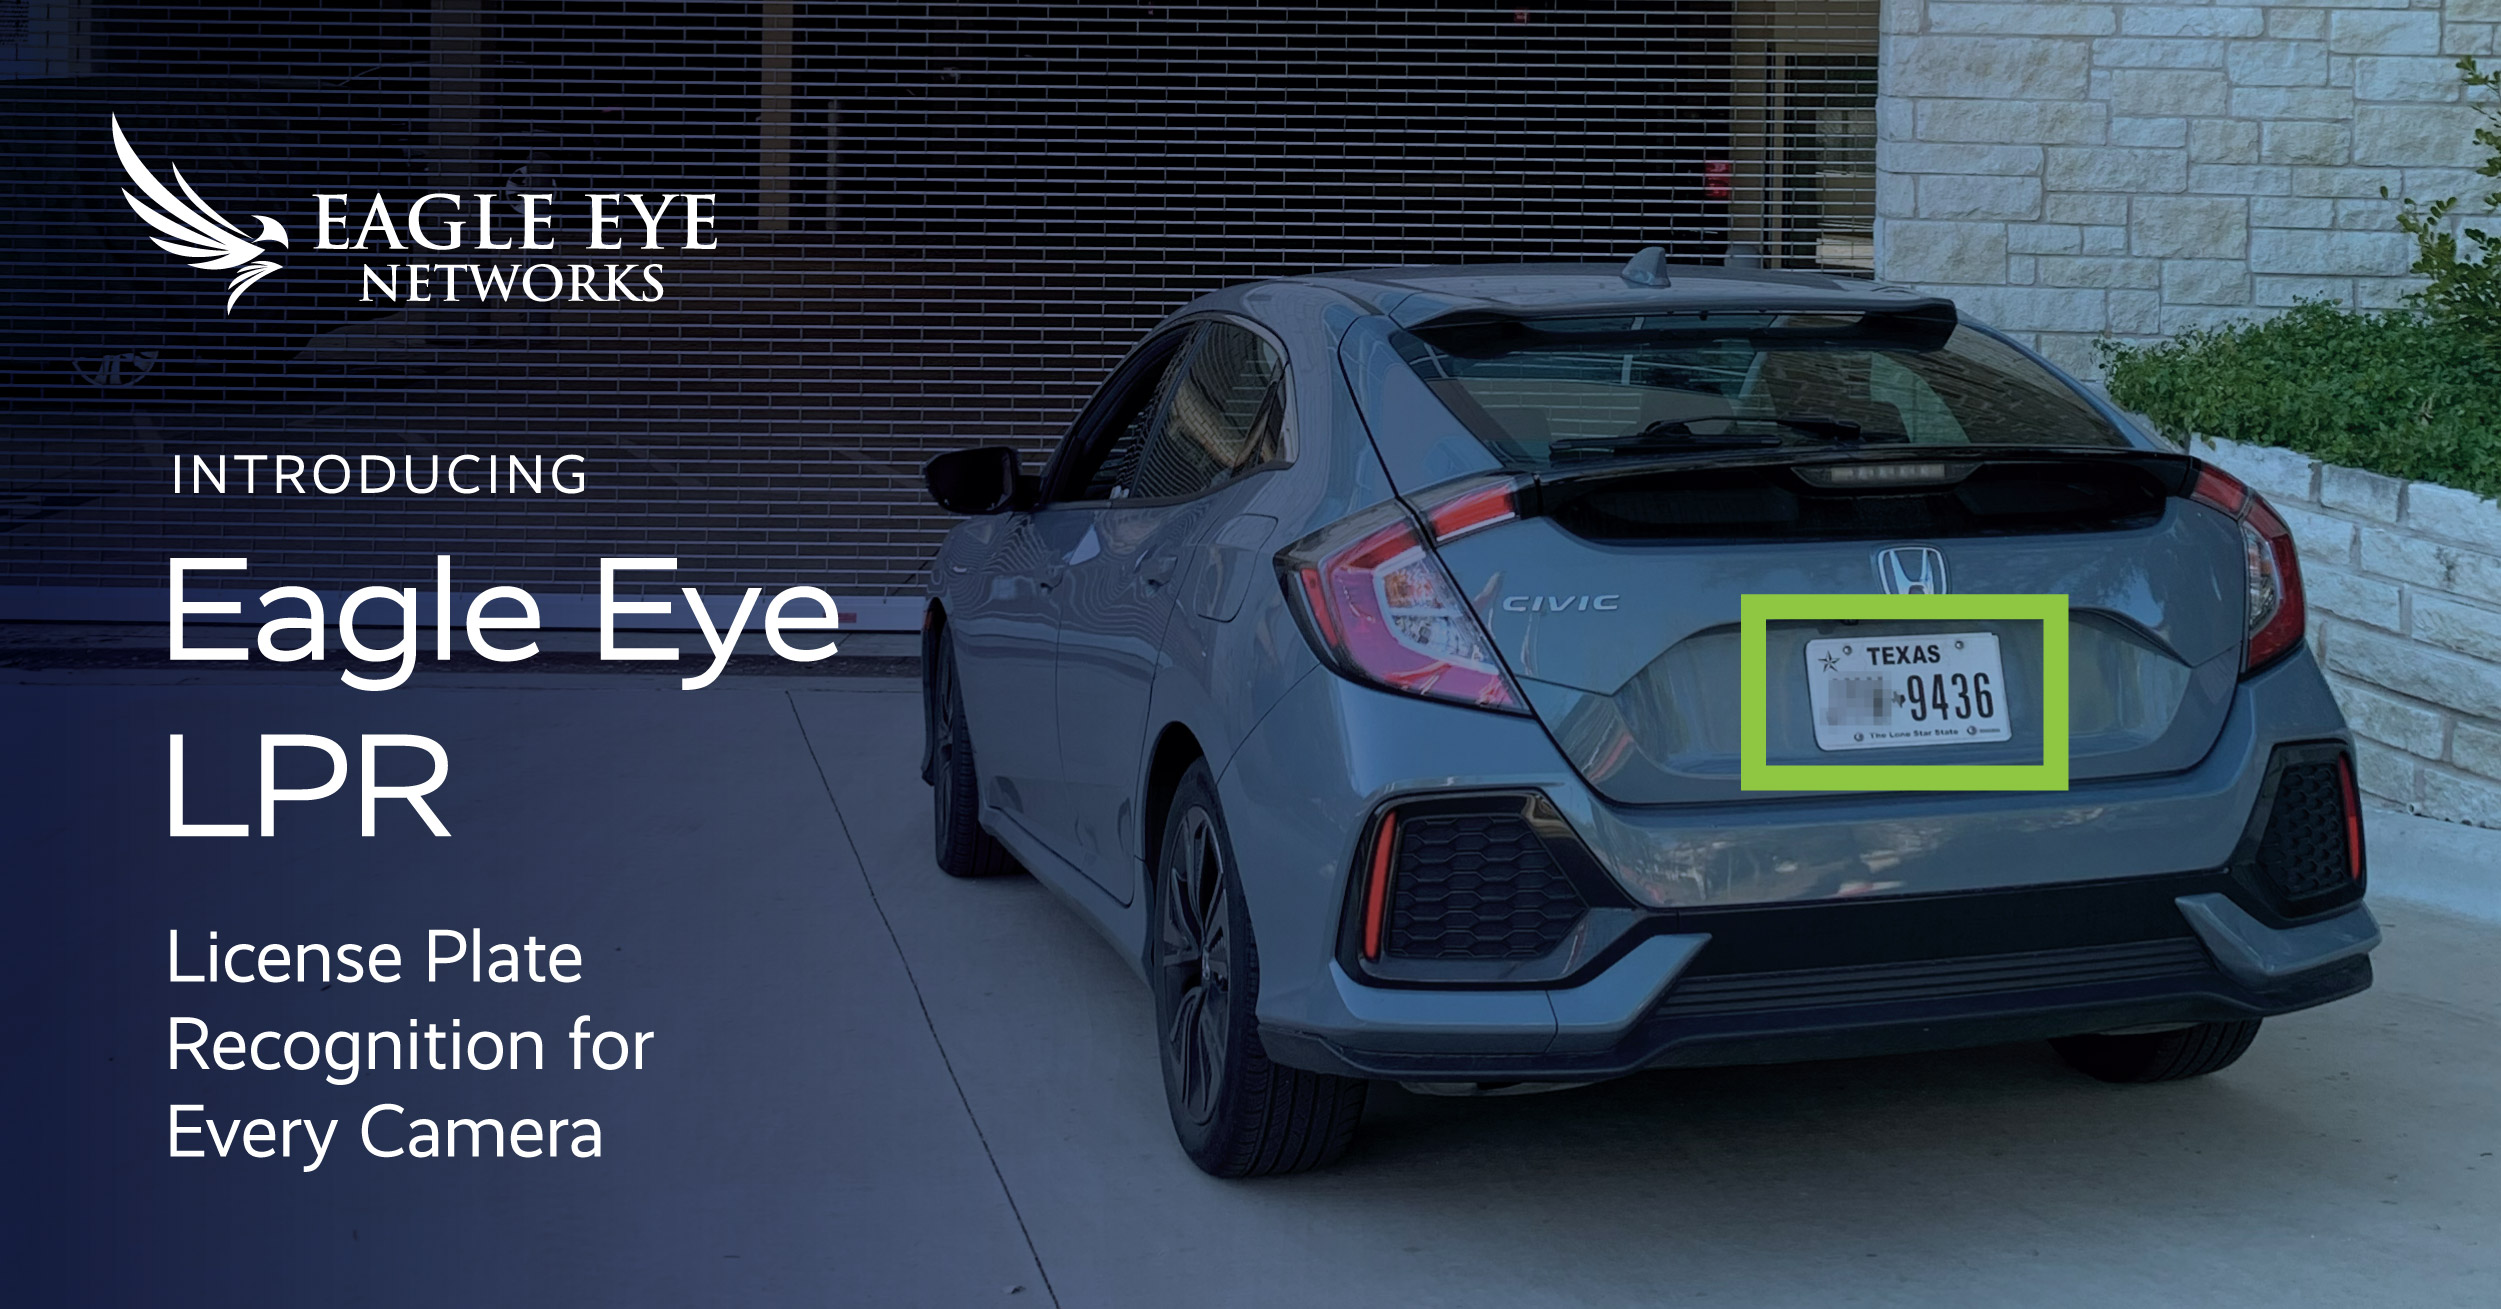 Eagle Eye License Plate Recognition Solution